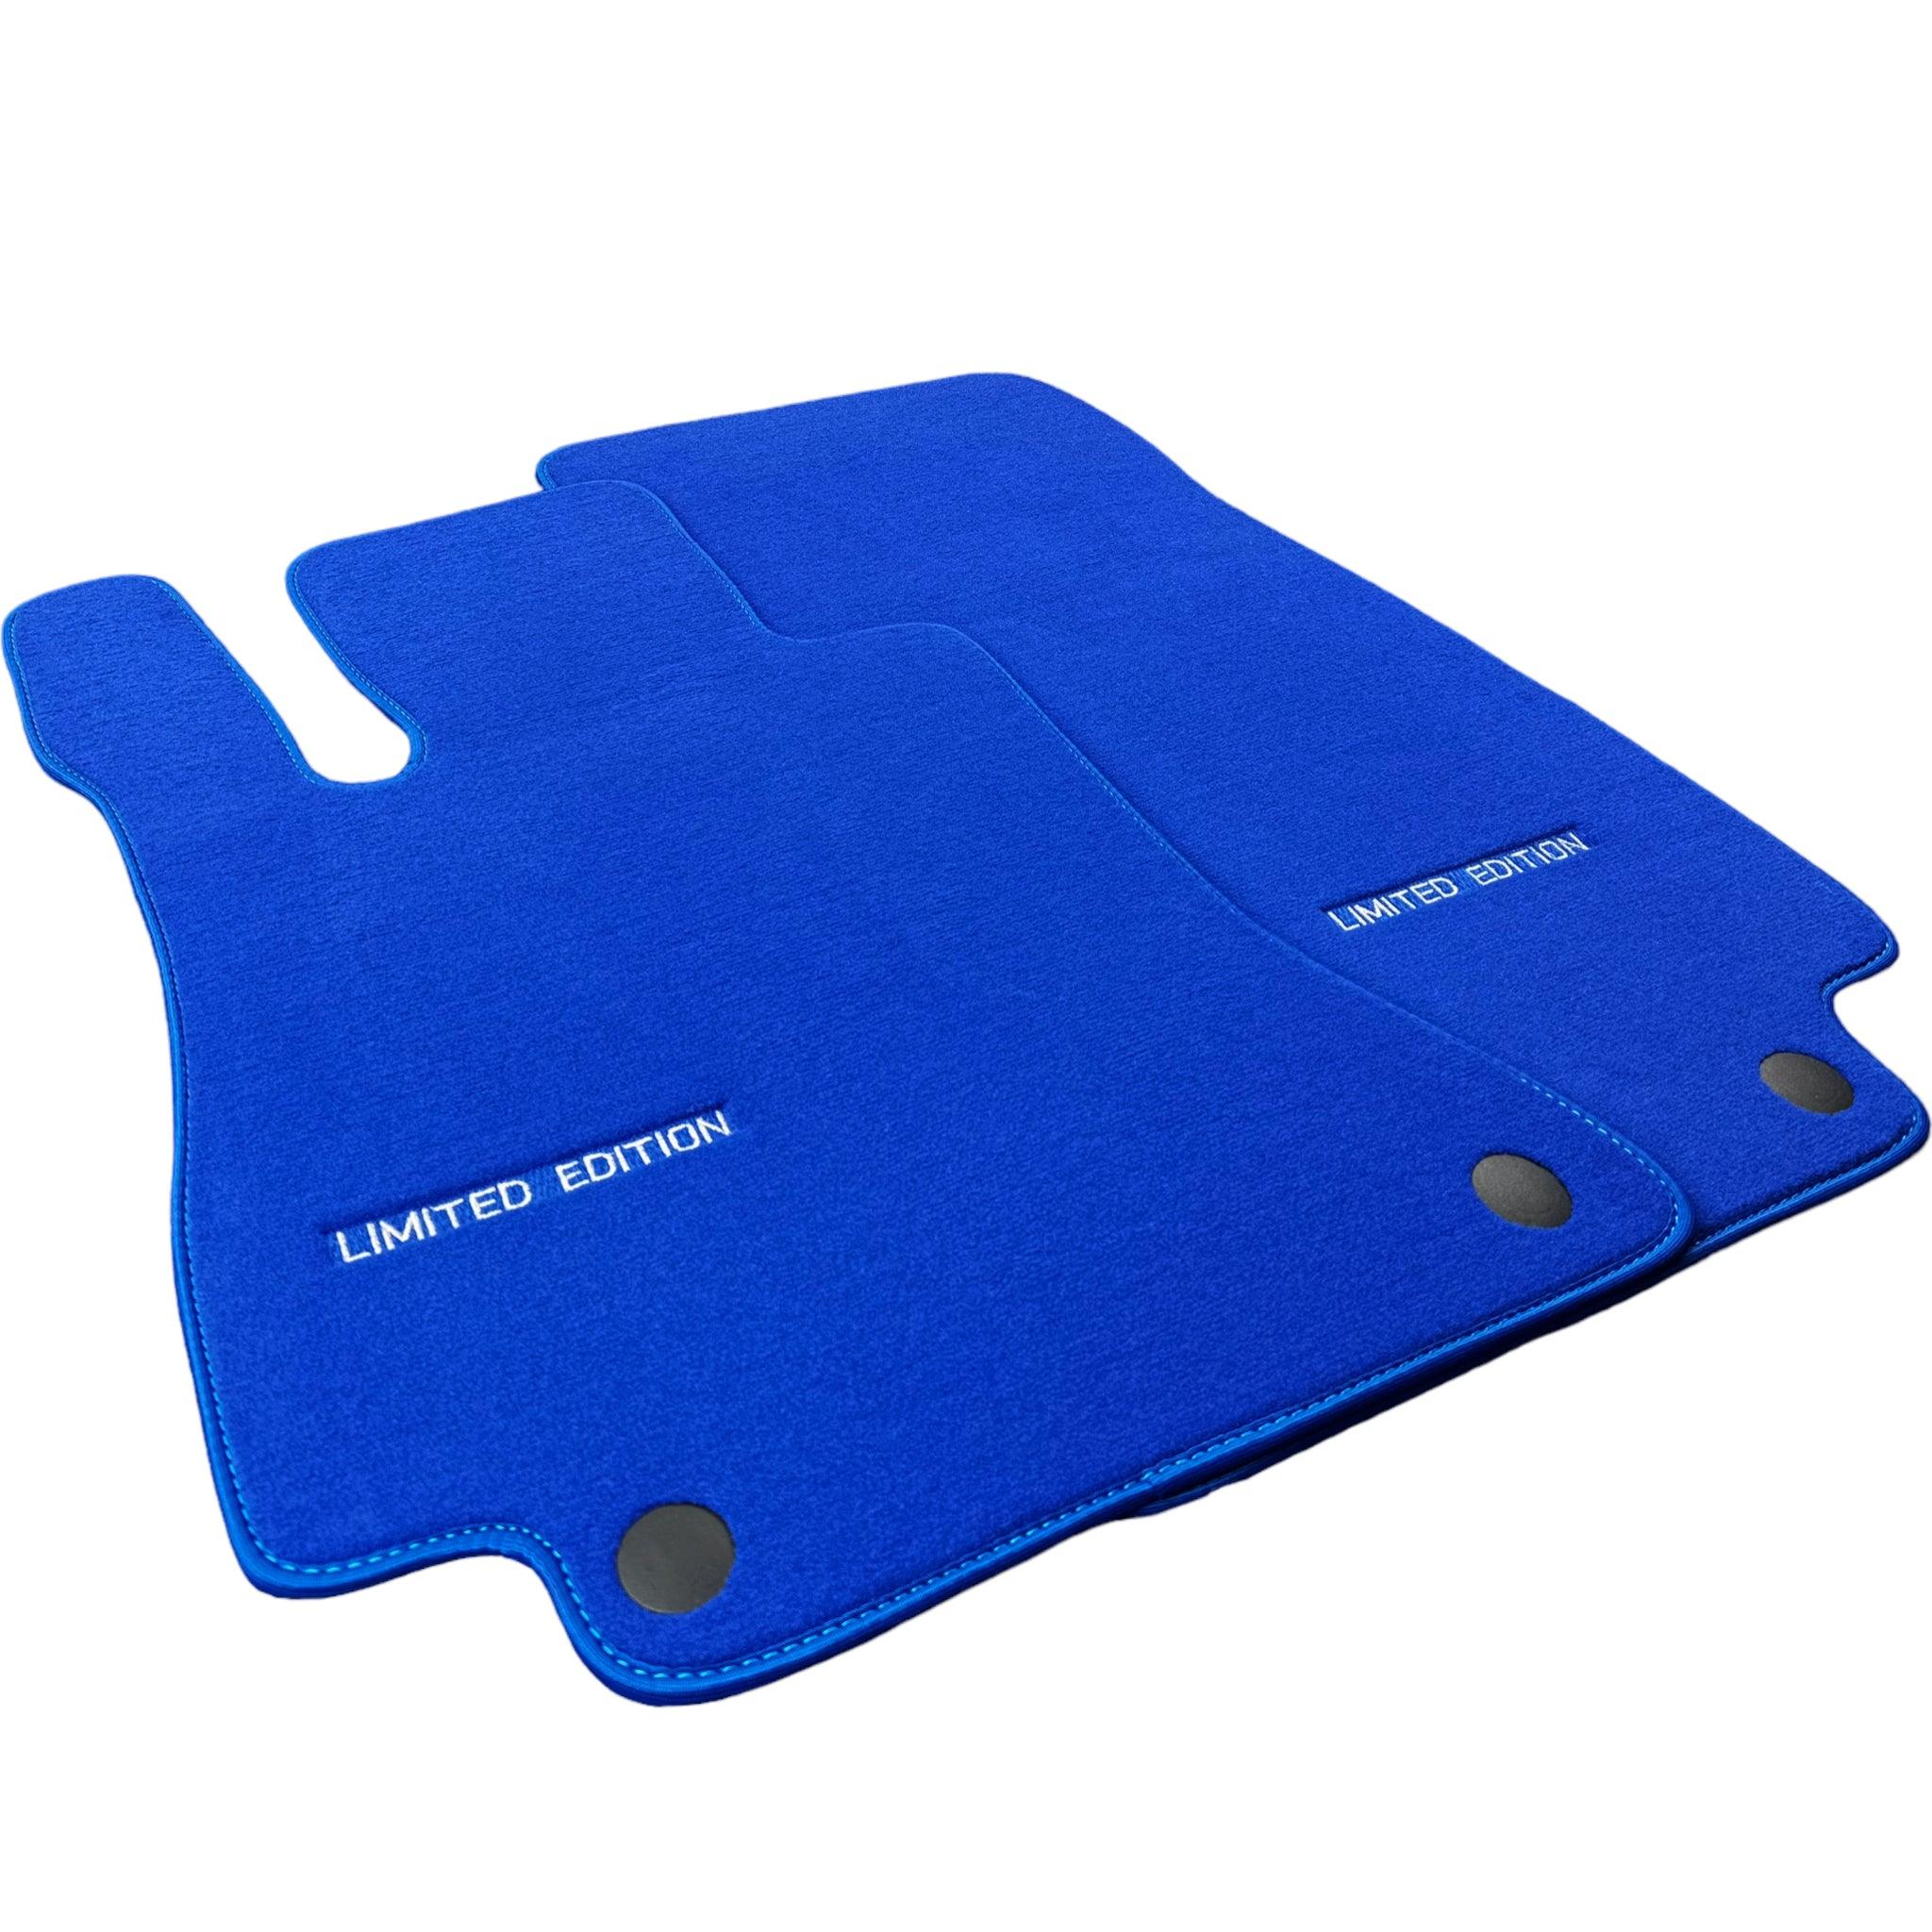 Blue Floor Mats For Mercedes Benz E-Class C207 Coupe Facelift (2013-2017) | Limited Edition